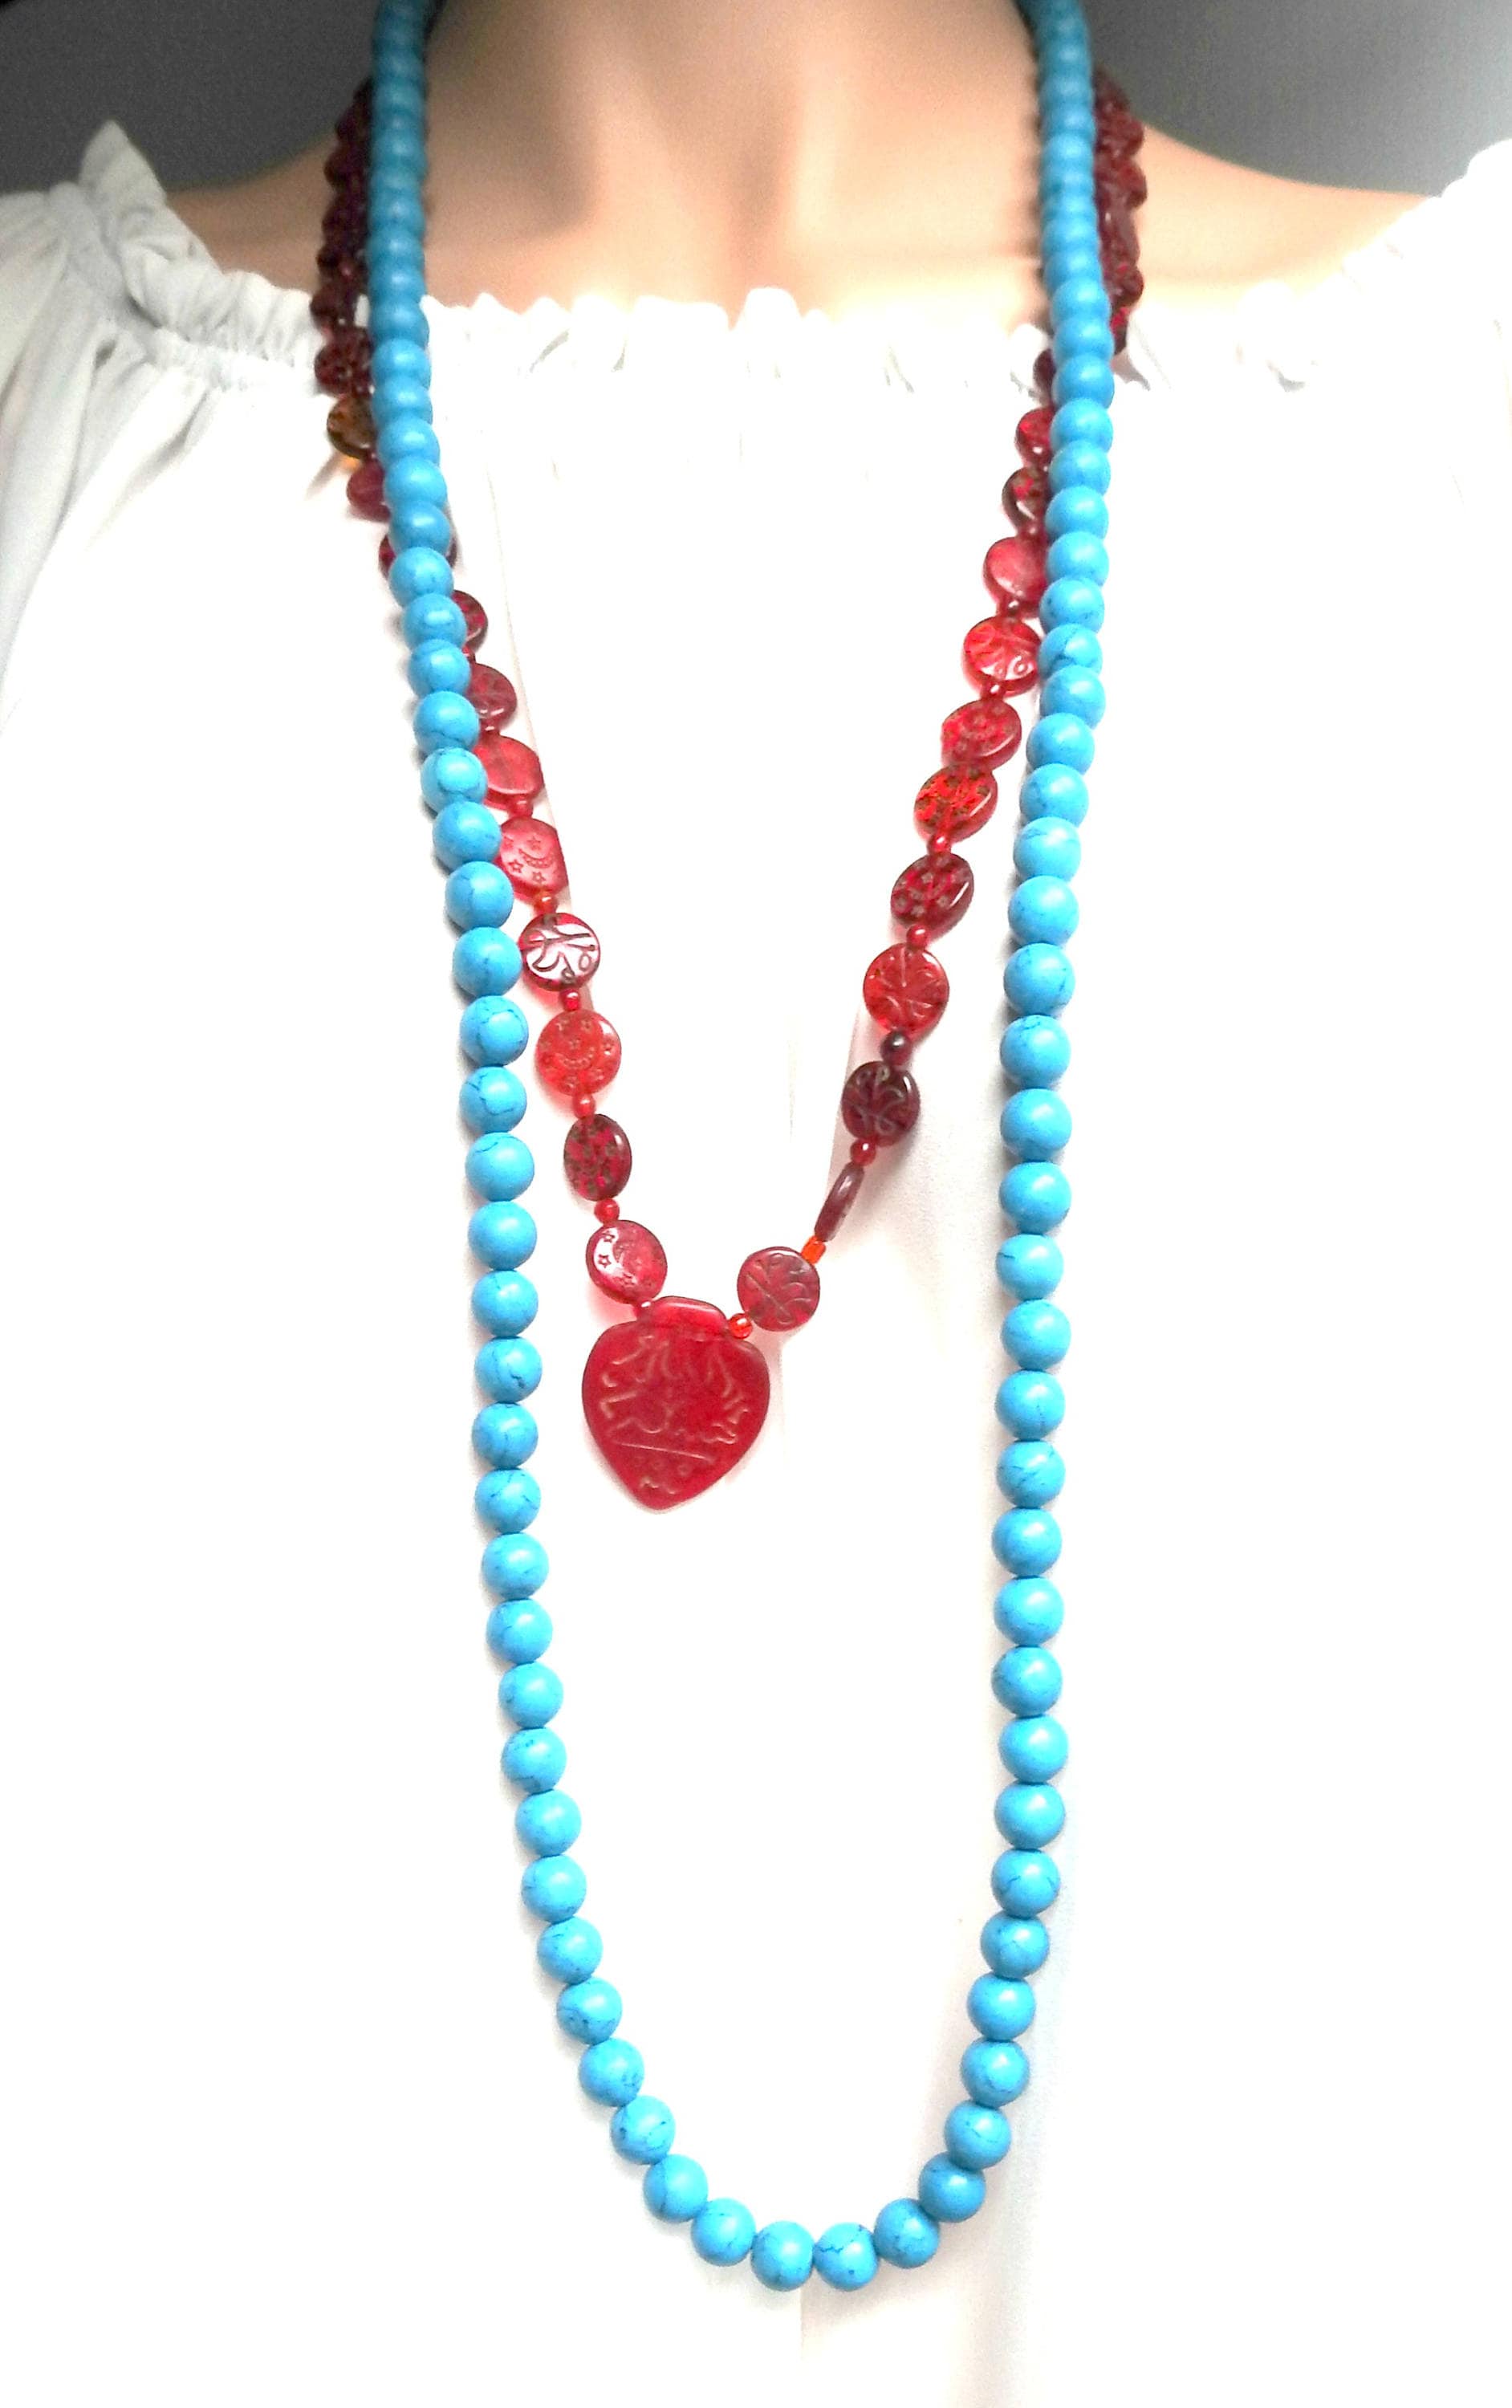 Bohemian Style Beaded Necklaces for Women - Set of 2 (Turquoise Blue and Garnet Red) - Boho-chic Accessories - Gift for women